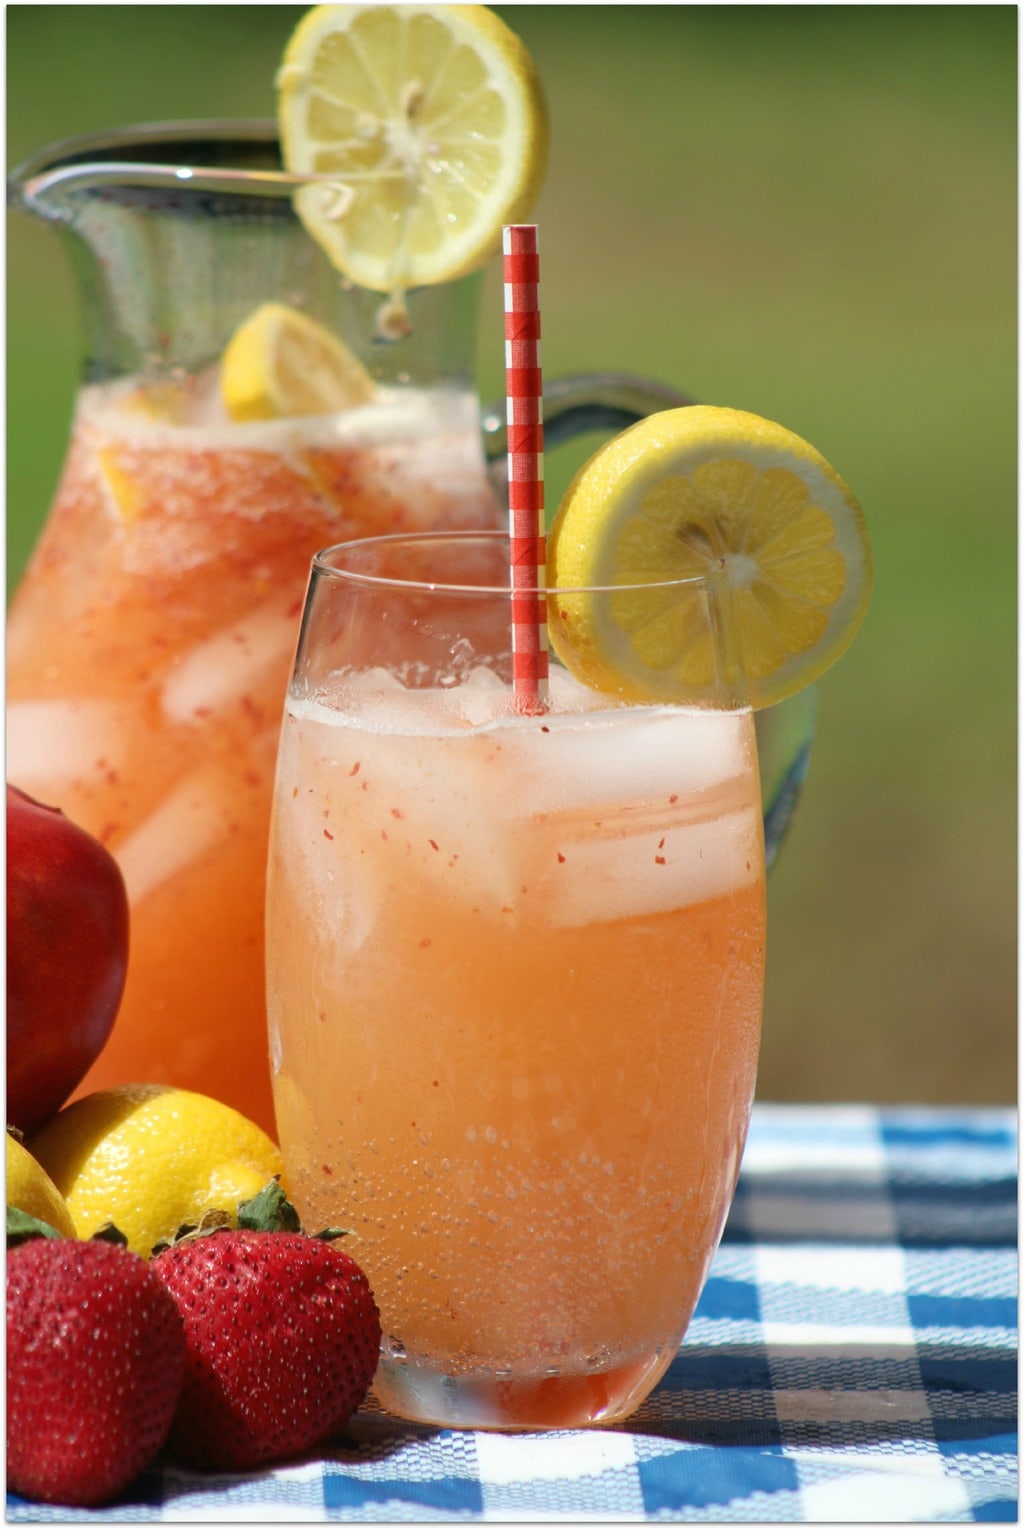 Looking for a refreshing Summer drink? This recipe for Strawberry Nectarine Lemonade is the bomb! 